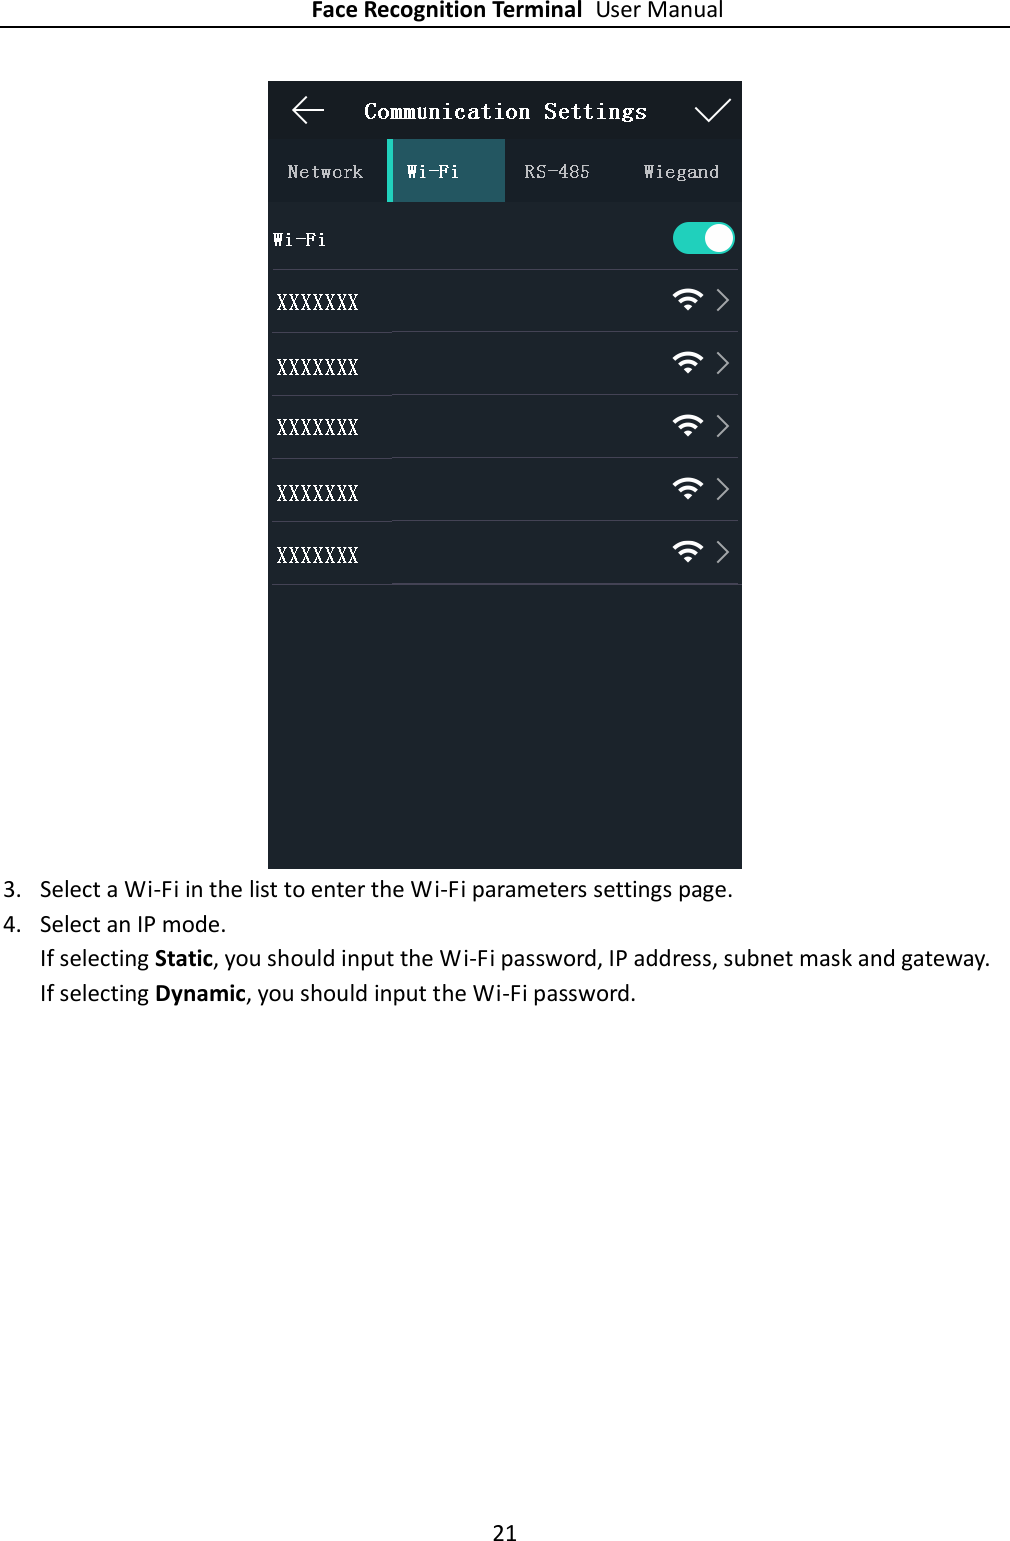 Face Recognition Terminal User Manual 21   3. Select a Wi-Fi in the list to enter the Wi-Fi parameters settings page. 4. Select an IP mode. If selecting Static, you should input the Wi-Fi password, IP address, subnet mask and gateway. If selecting Dynamic, you should input the Wi-Fi password. 